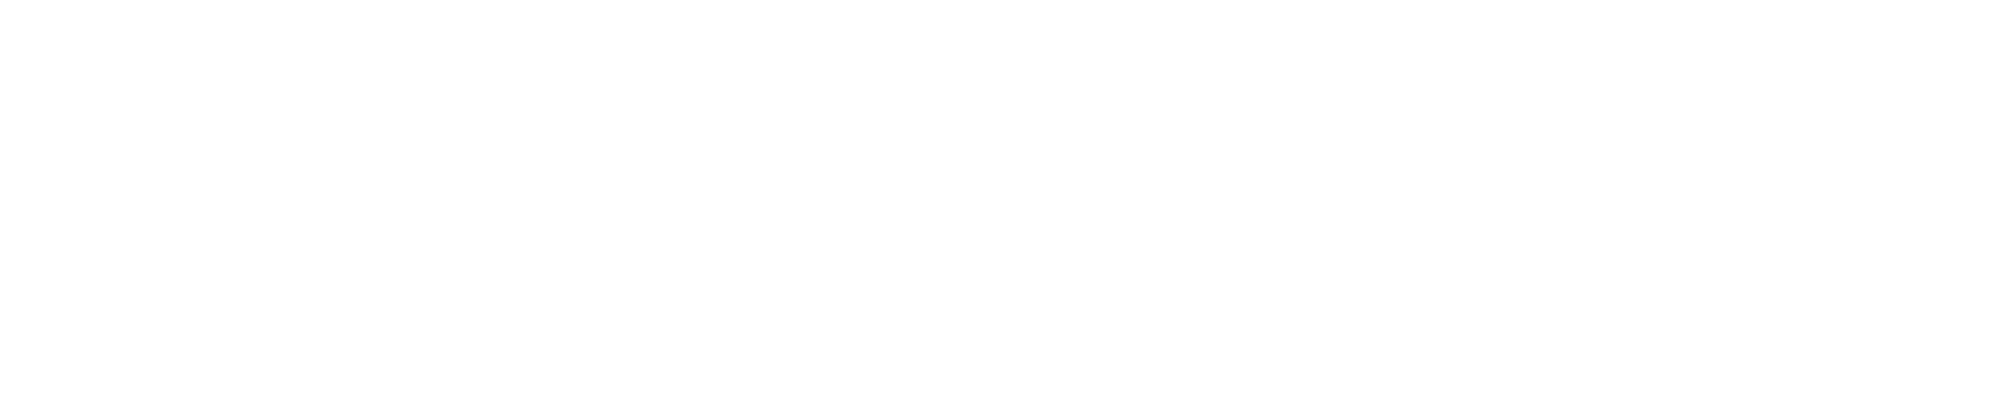 「HAPPY DAYS幸せな日々」OFFICIAL MUSIC VIDEO